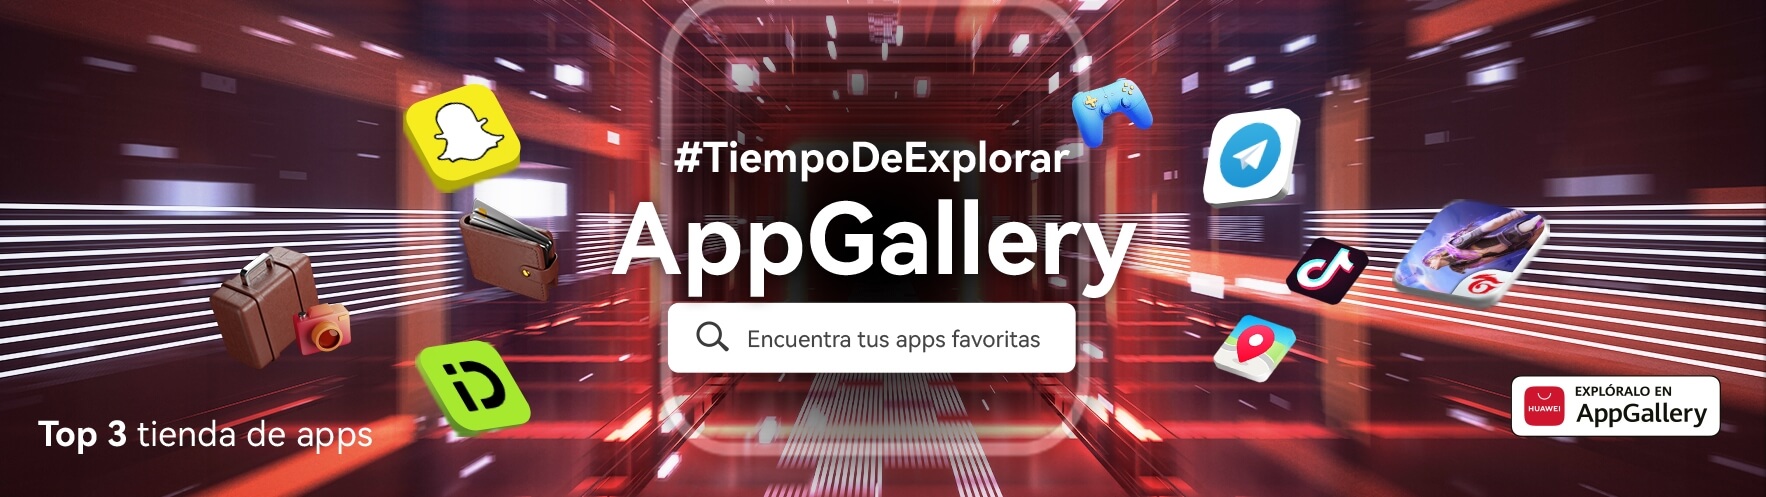 Appgallery